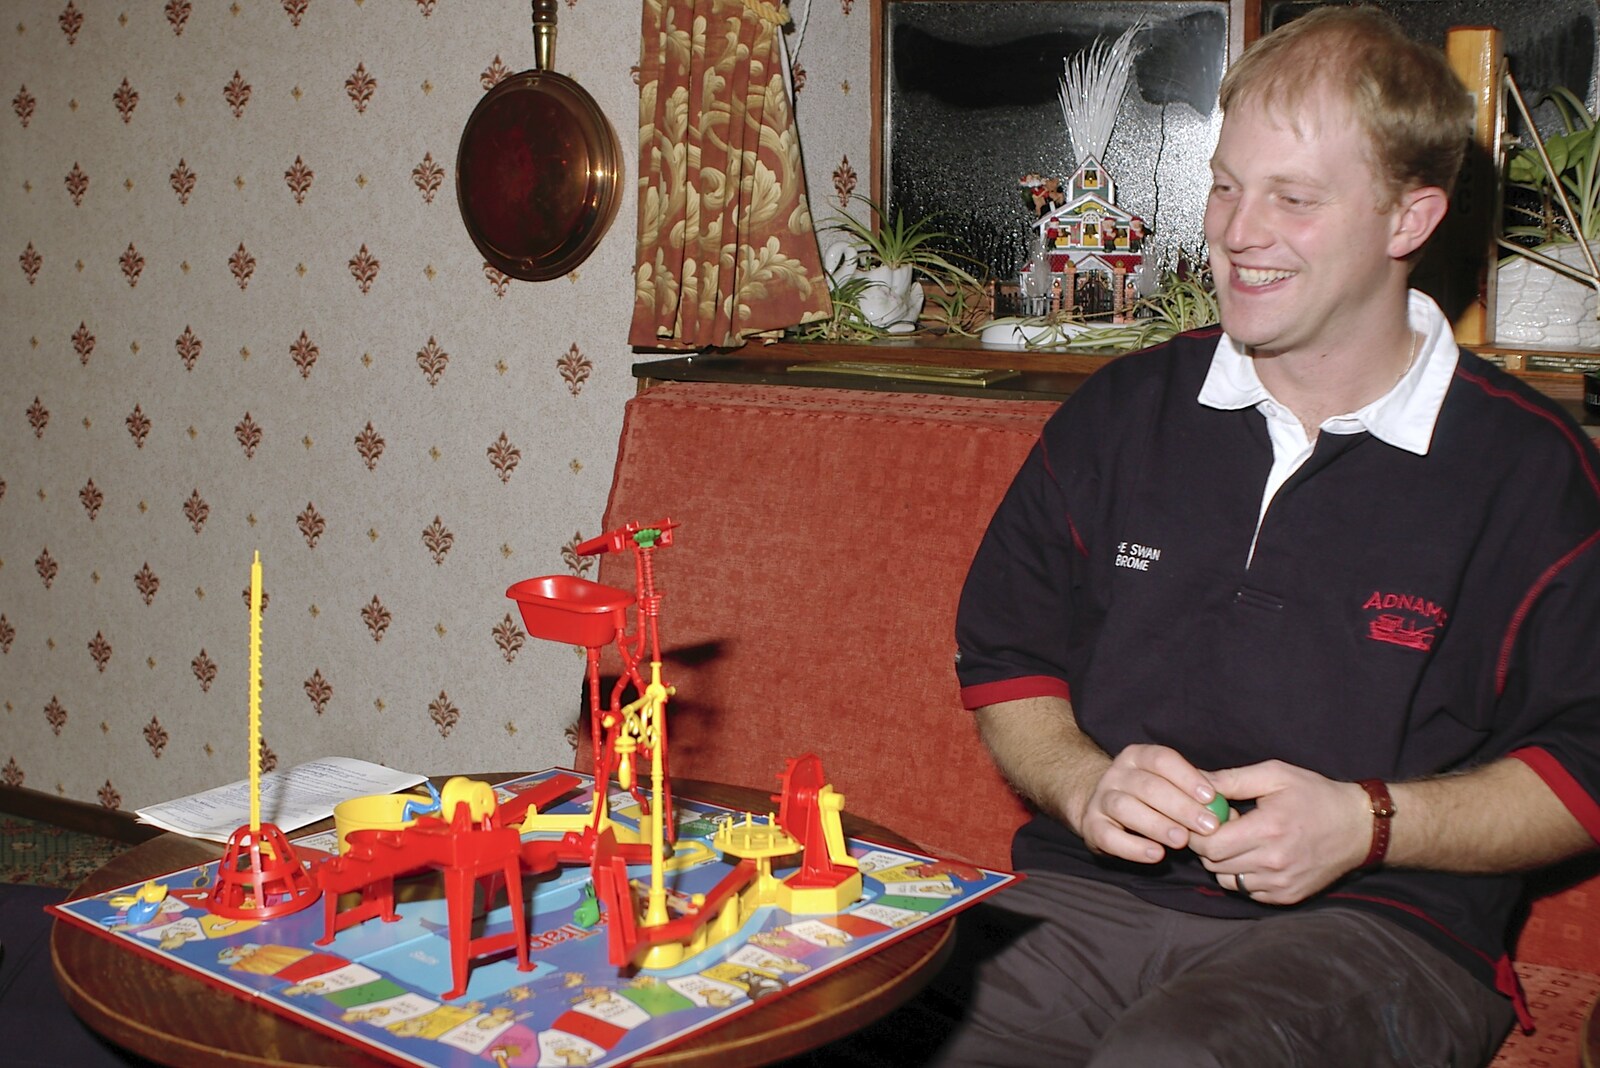 Paul sets up Mousetrap from Christmas Day at the Brome Swan, Brome, Suffolk - 25th December 2004